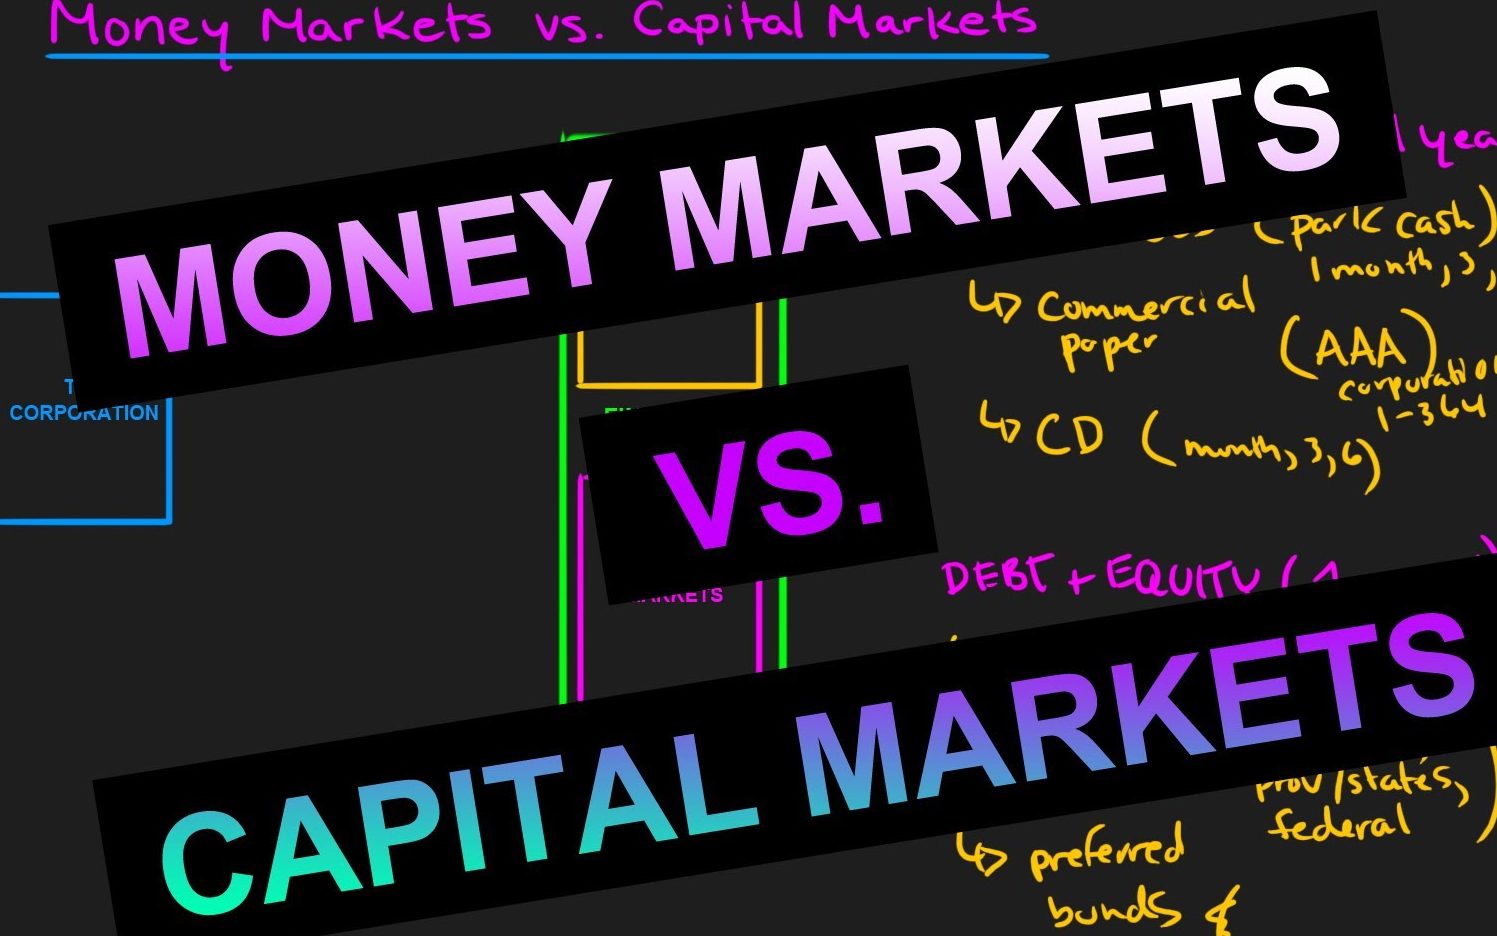 How Do Capital Markets Differ From Money Markets